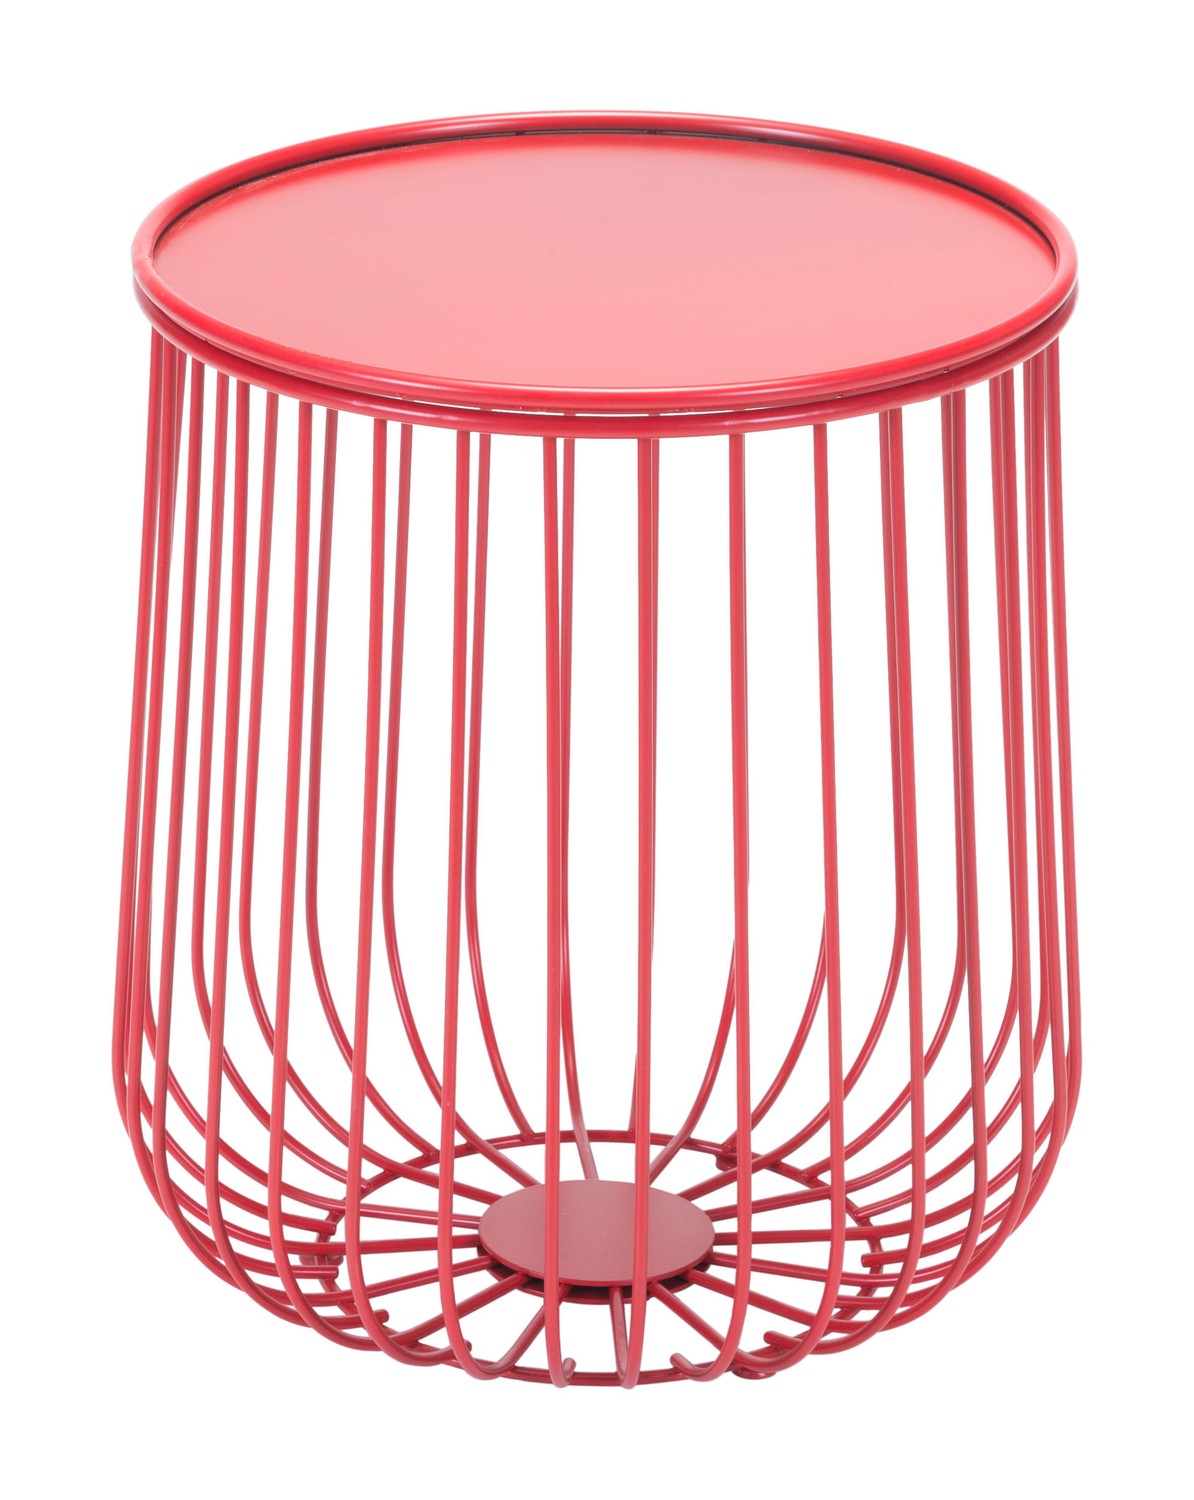 14.4" x 14.4" x 16.1" Red, Steel, Side Table